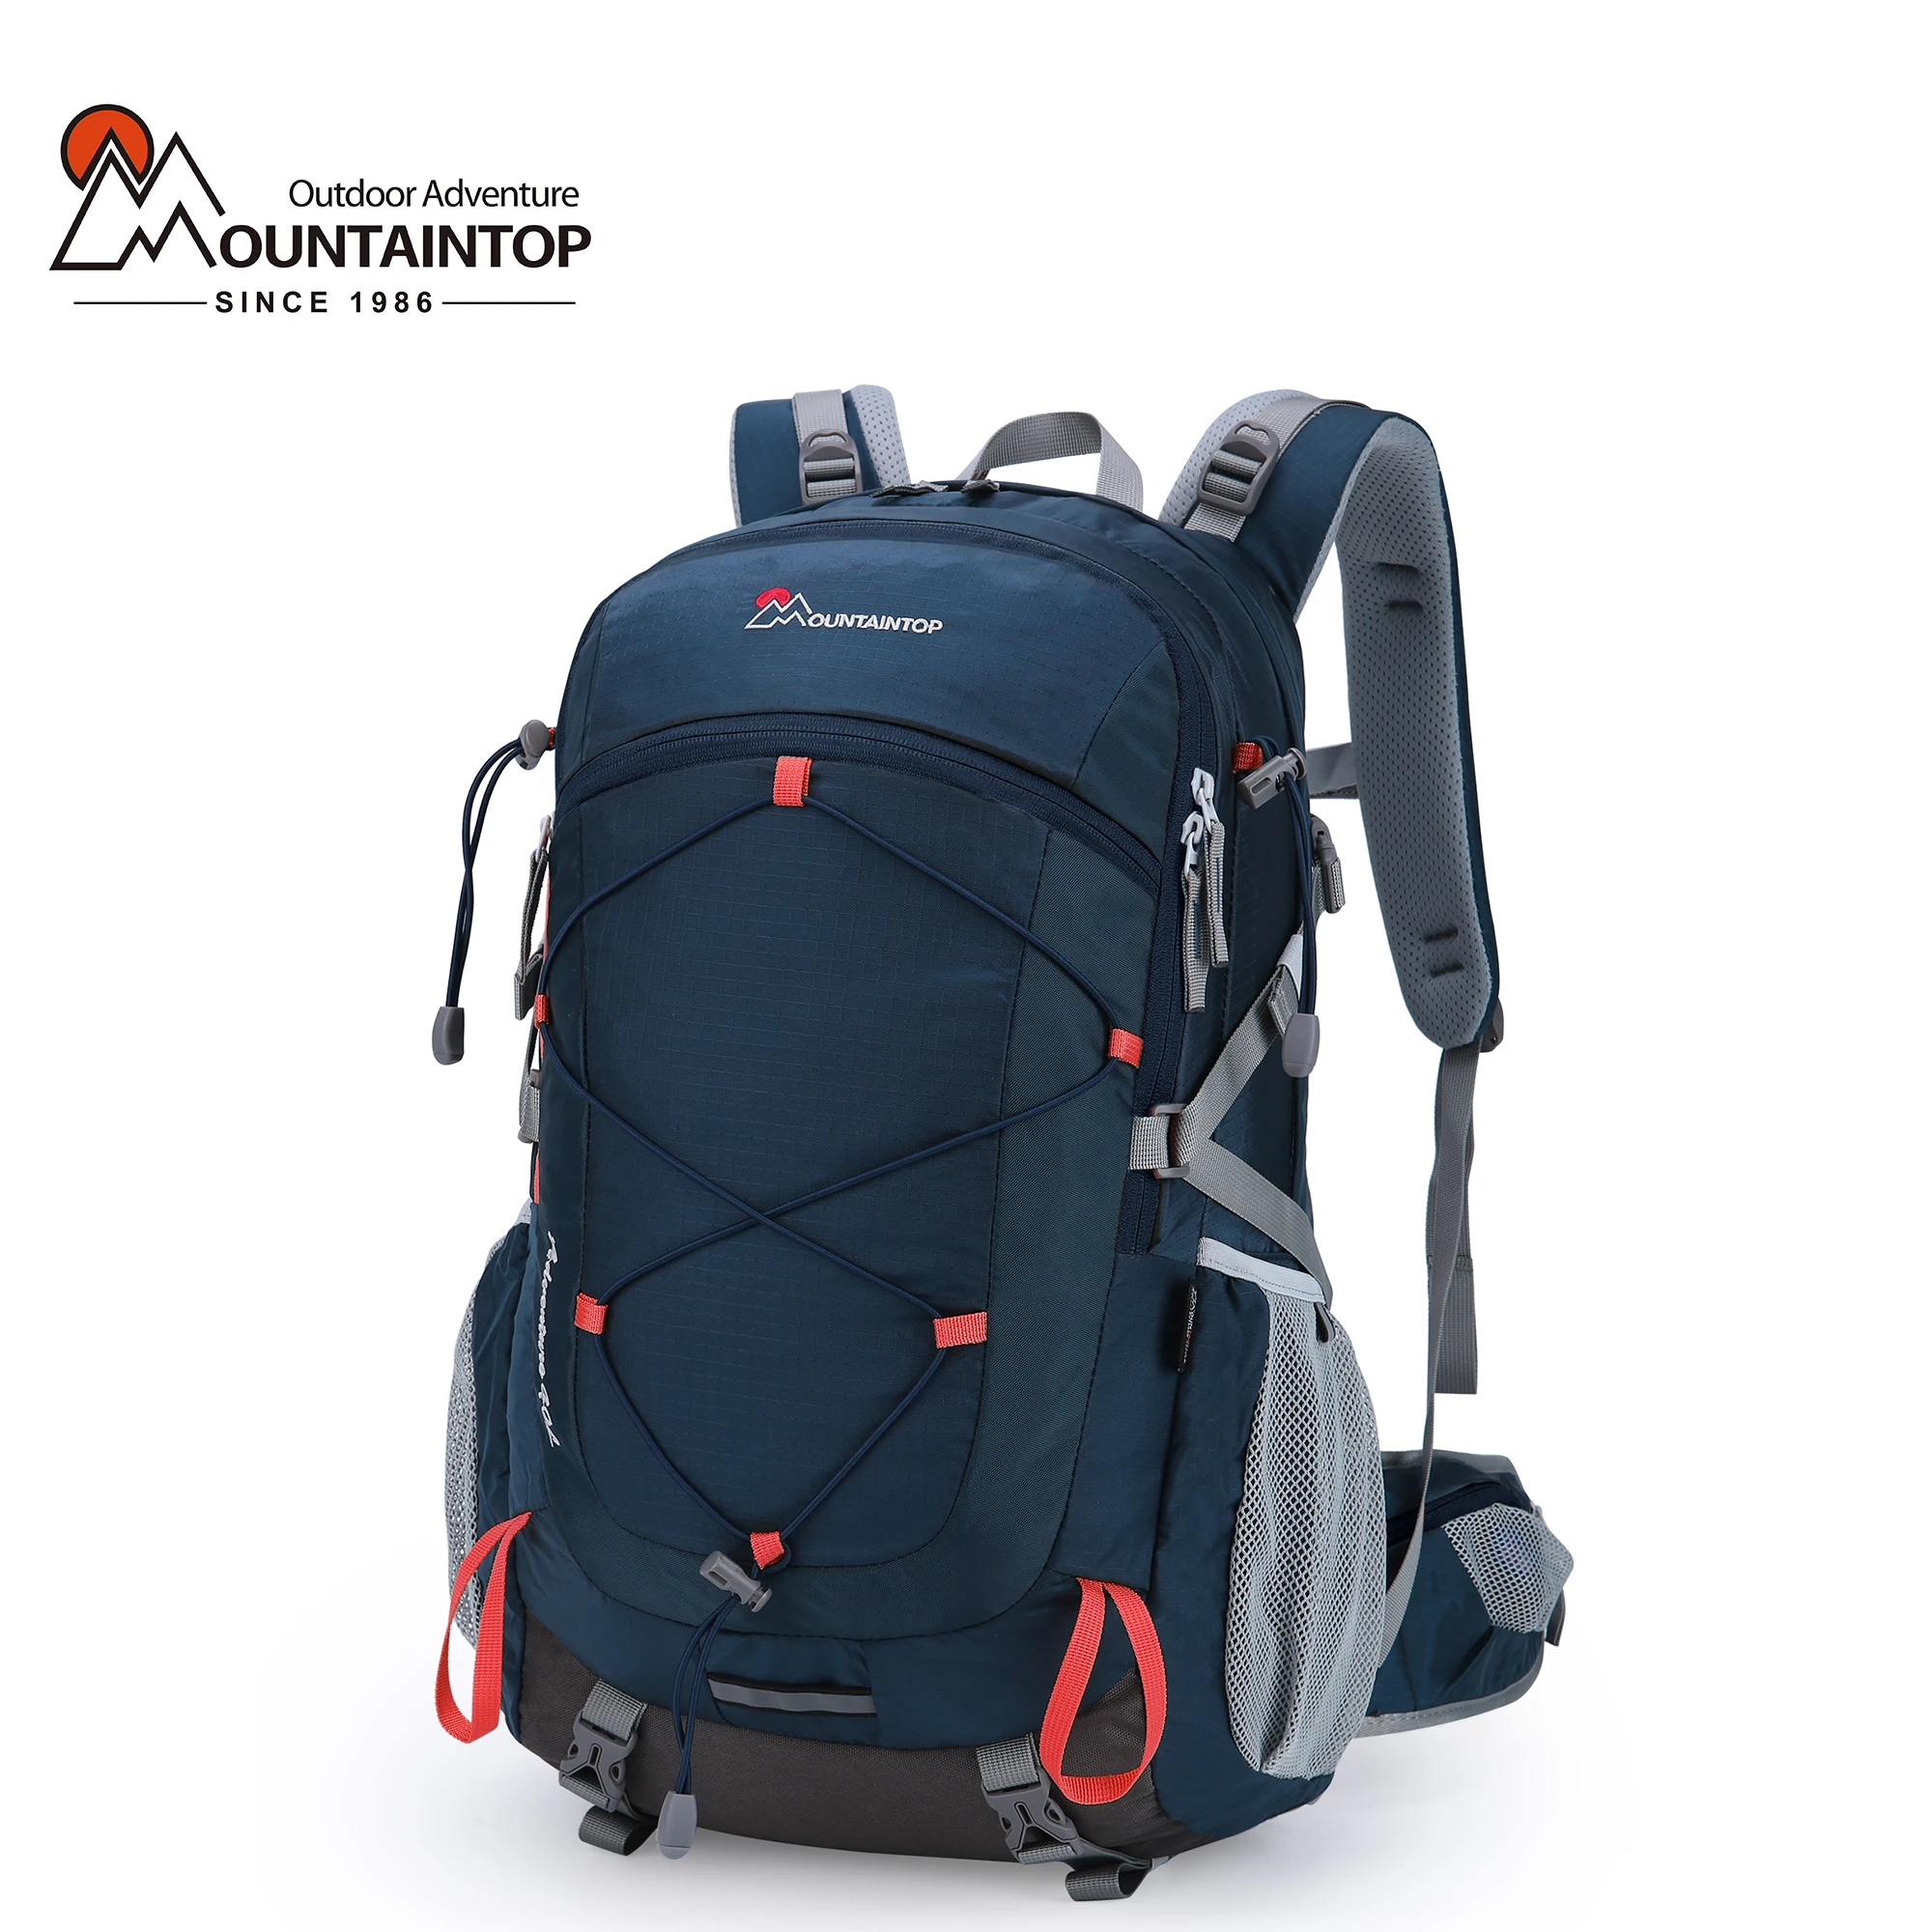 

MOUNTAINTOP 40L Hiking Backpack with Rain Covers and YKK Zippers for Backpacking, Camping, Cycling and Traveling